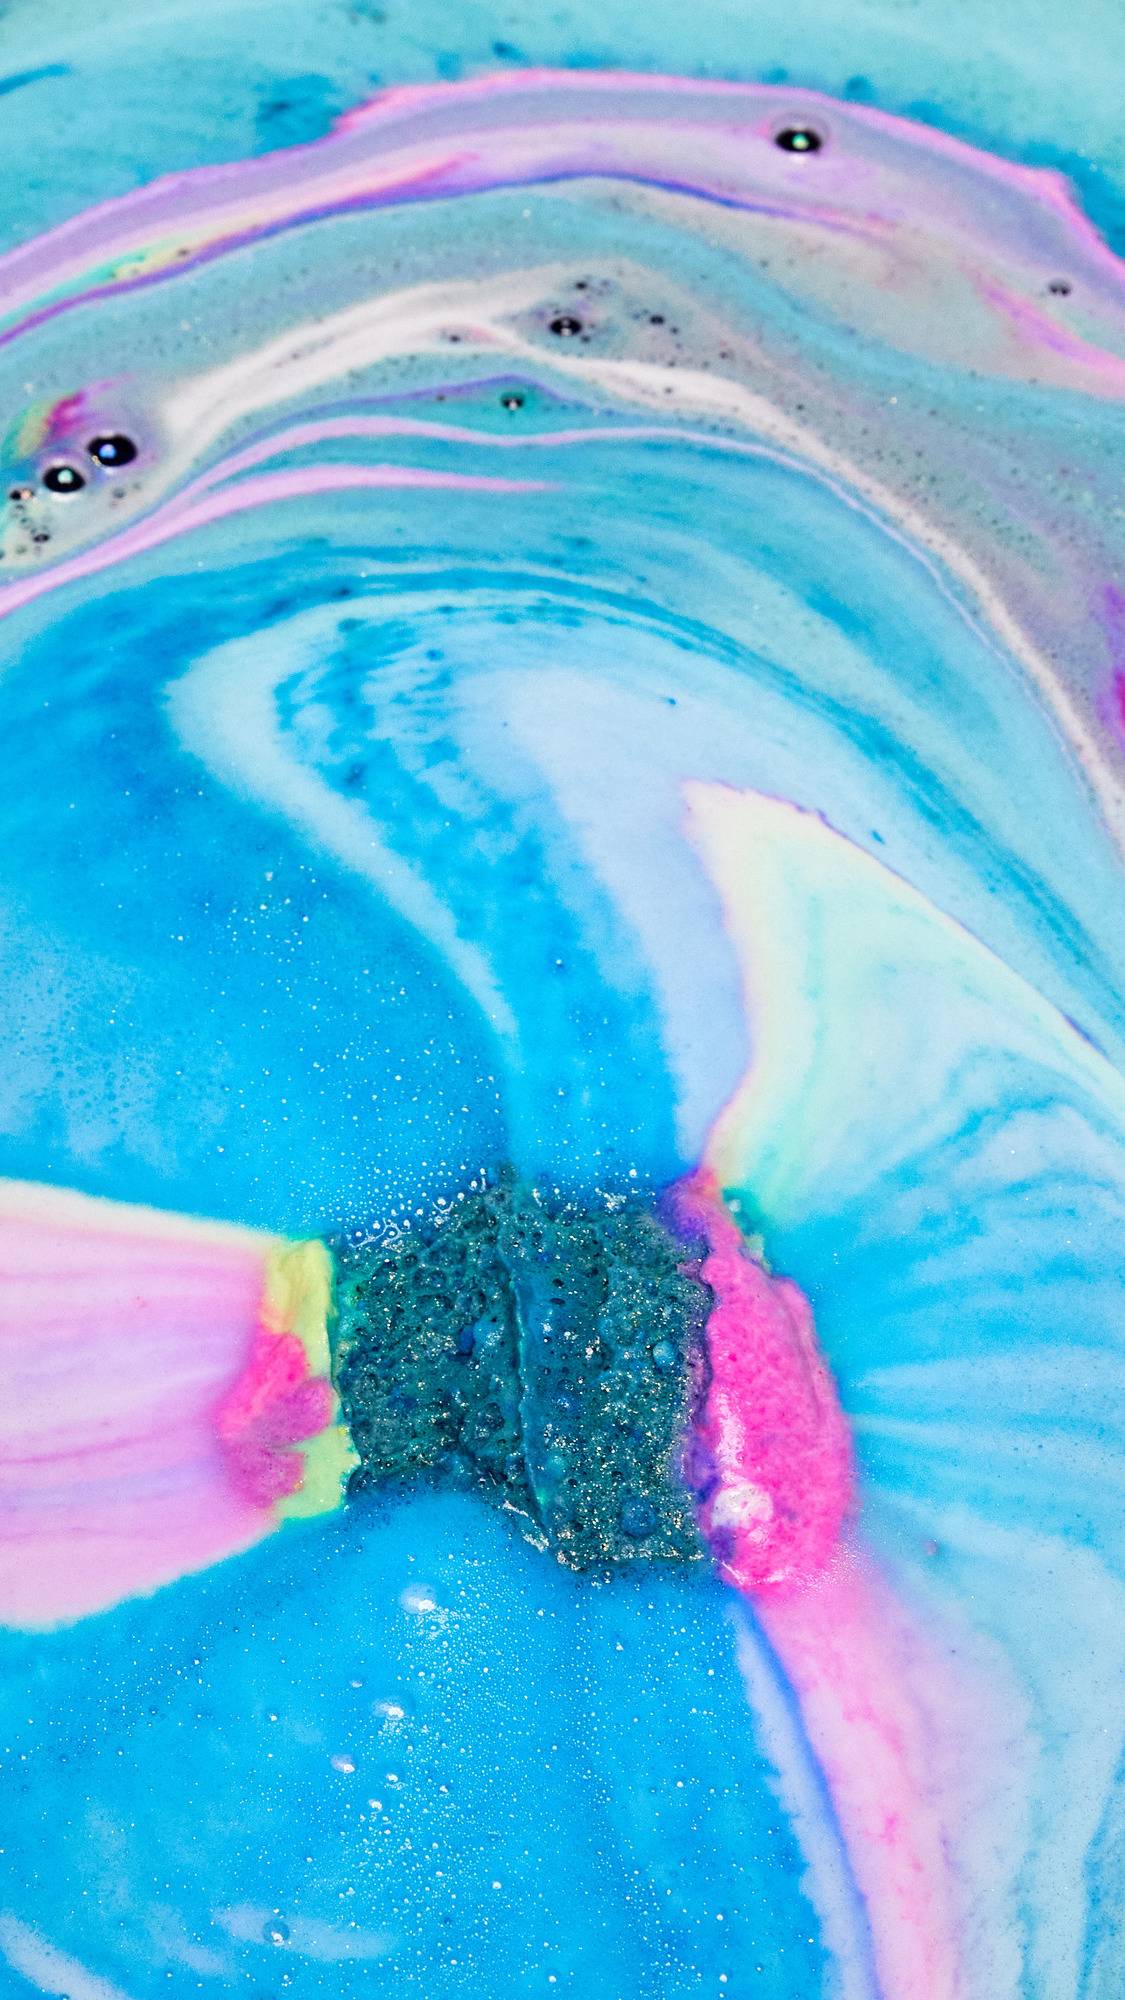 The Giant Intergalactic has been placed in the bath water and is creating a colourful galaxy of blues, purples and pinks.